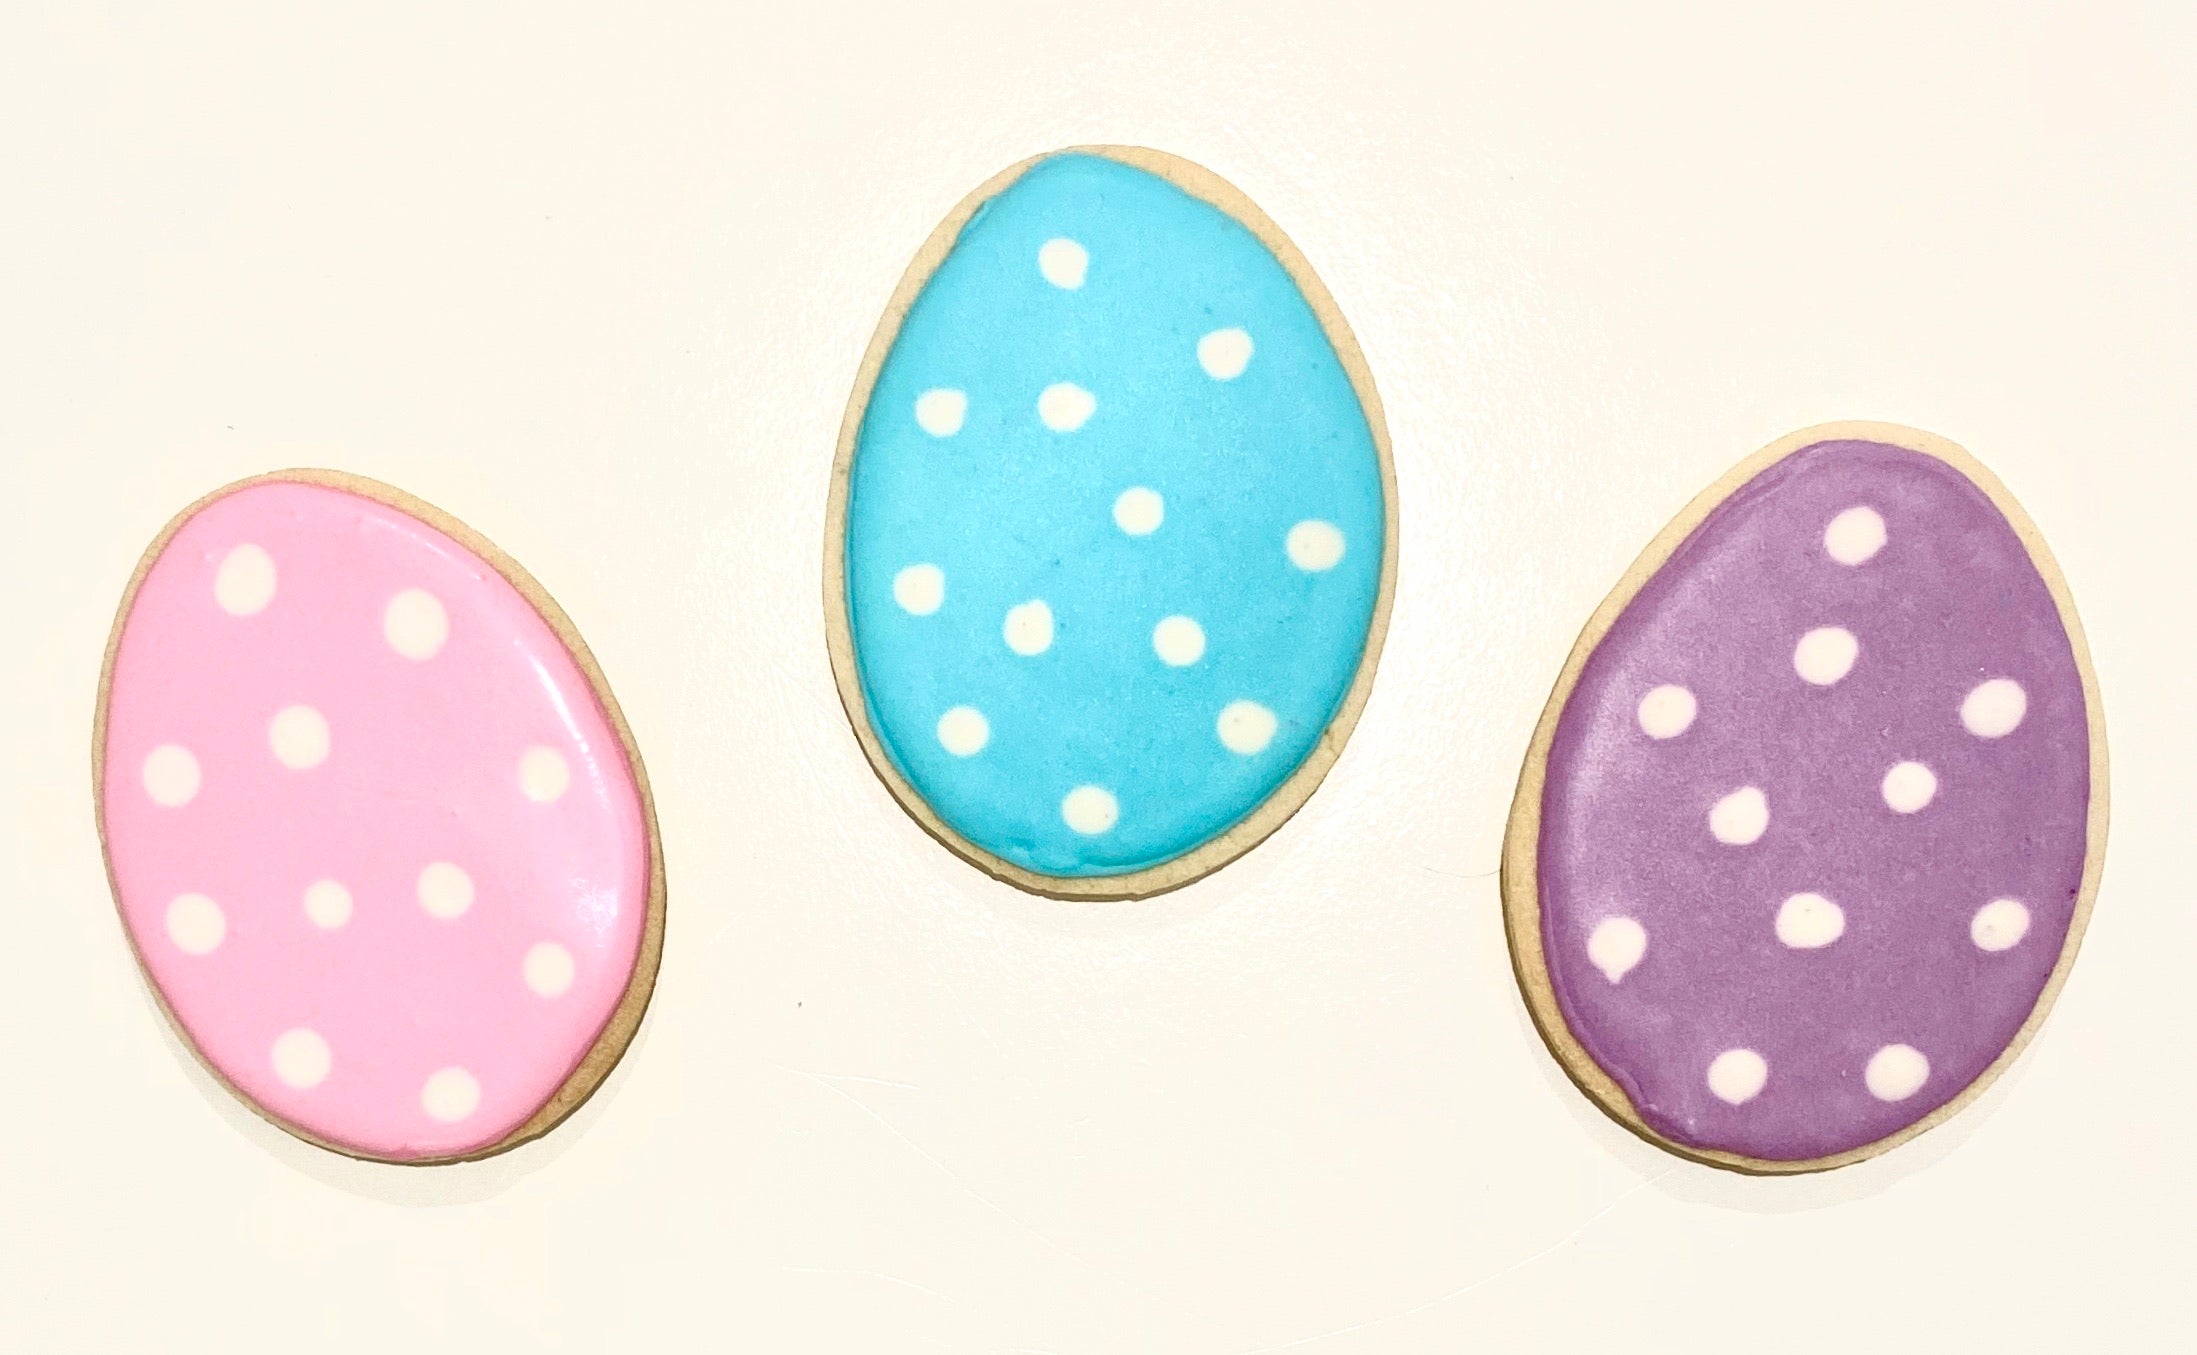 EASTER EGG COOKIE FAVORS